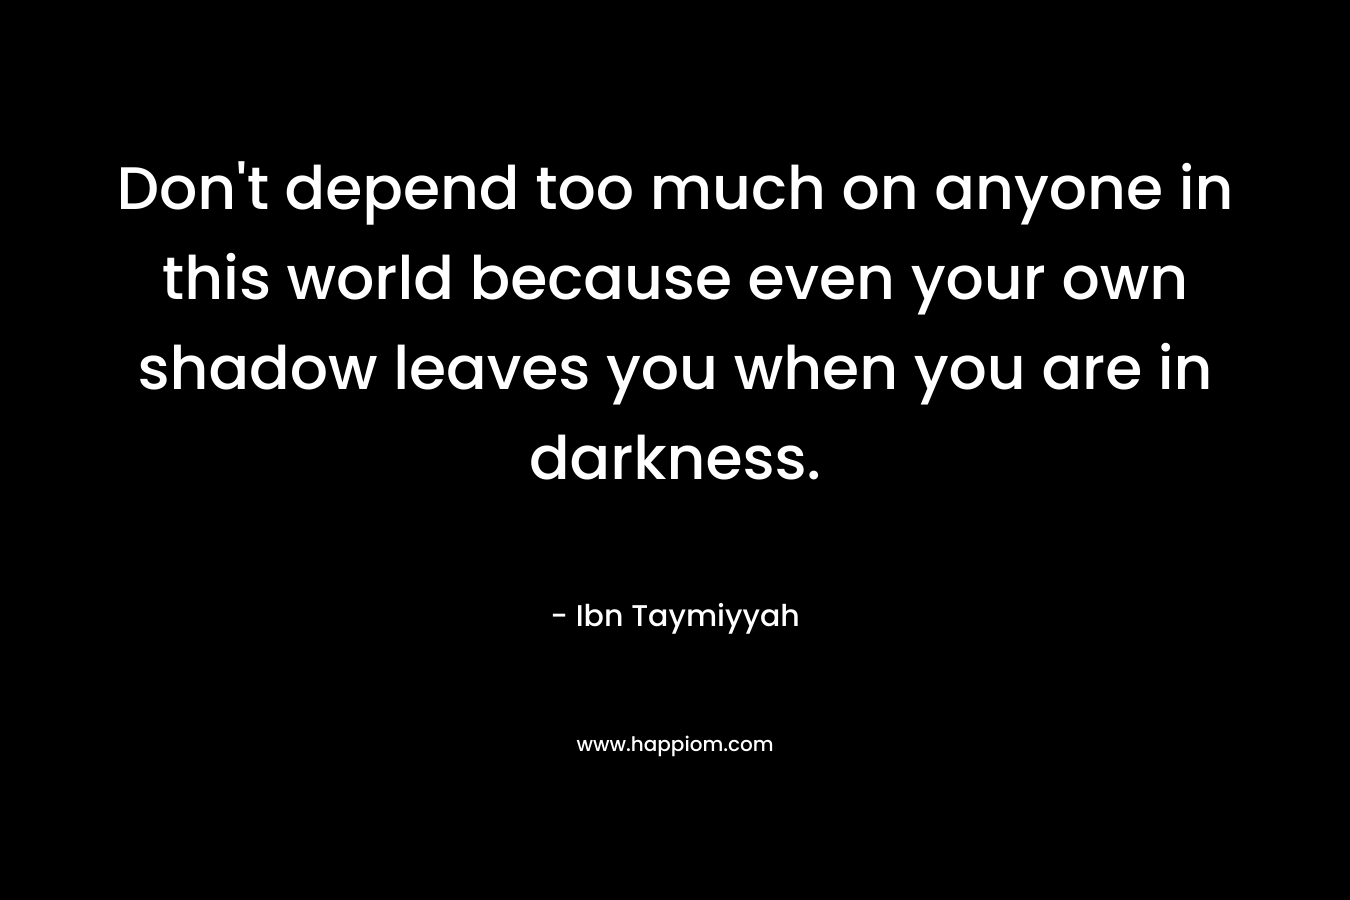 Don't depend too much on anyone in this world because even your own shadow leaves you when you are in darkness.